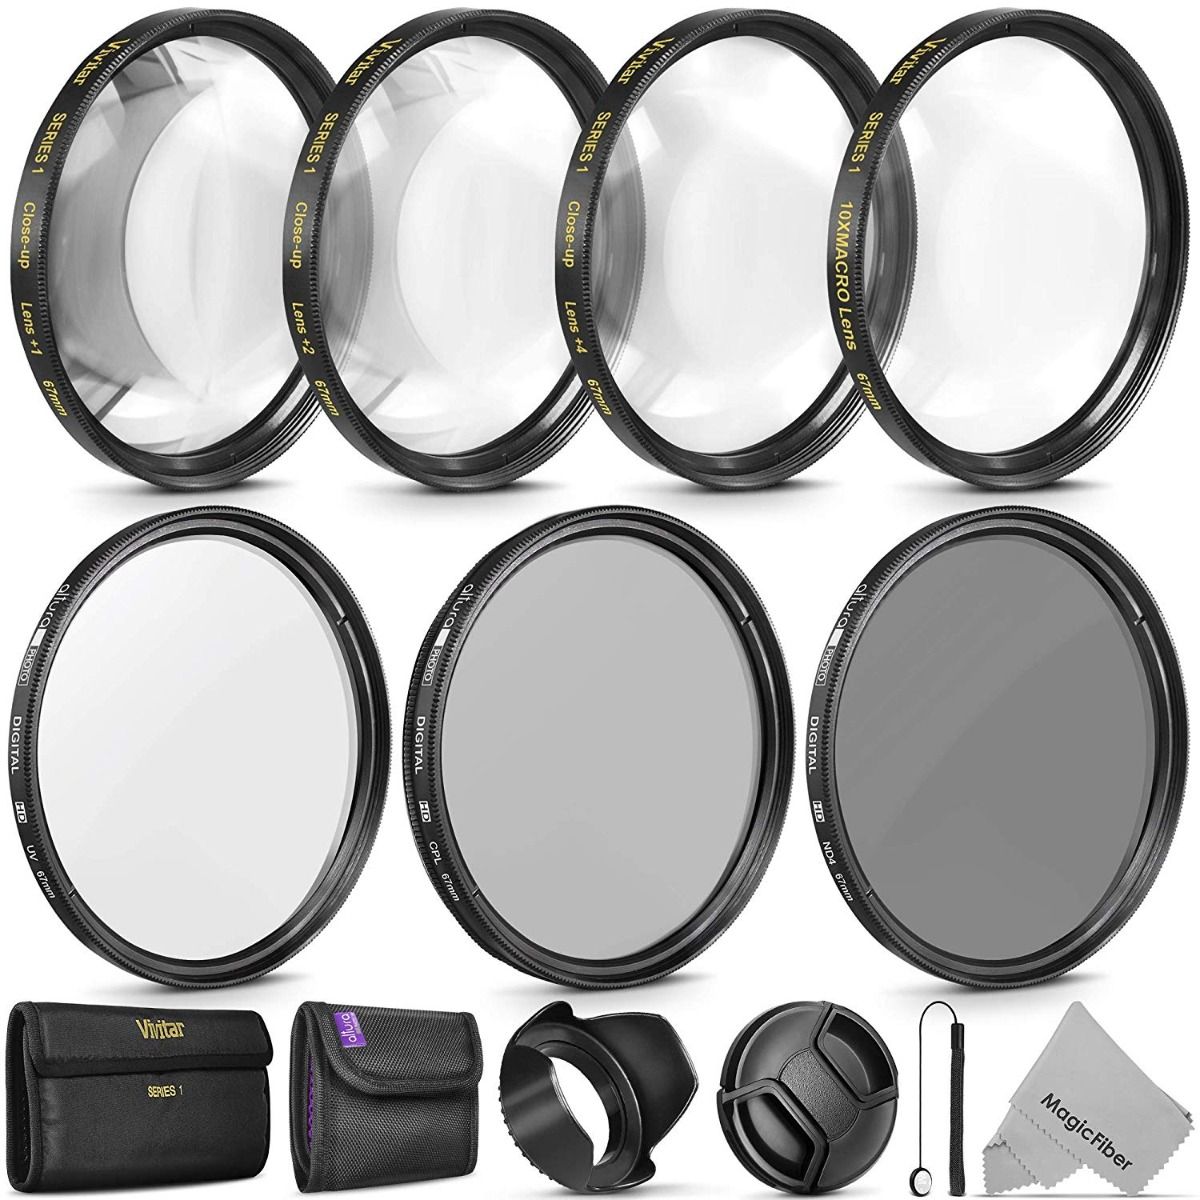 Includes UV Cases and More ND2 FLD CPL ND8 and 4 Macro Close-up Filters Lens Hood Cap 58mm Precision 10-PC Filter Kit Accessory Bundle ND4 